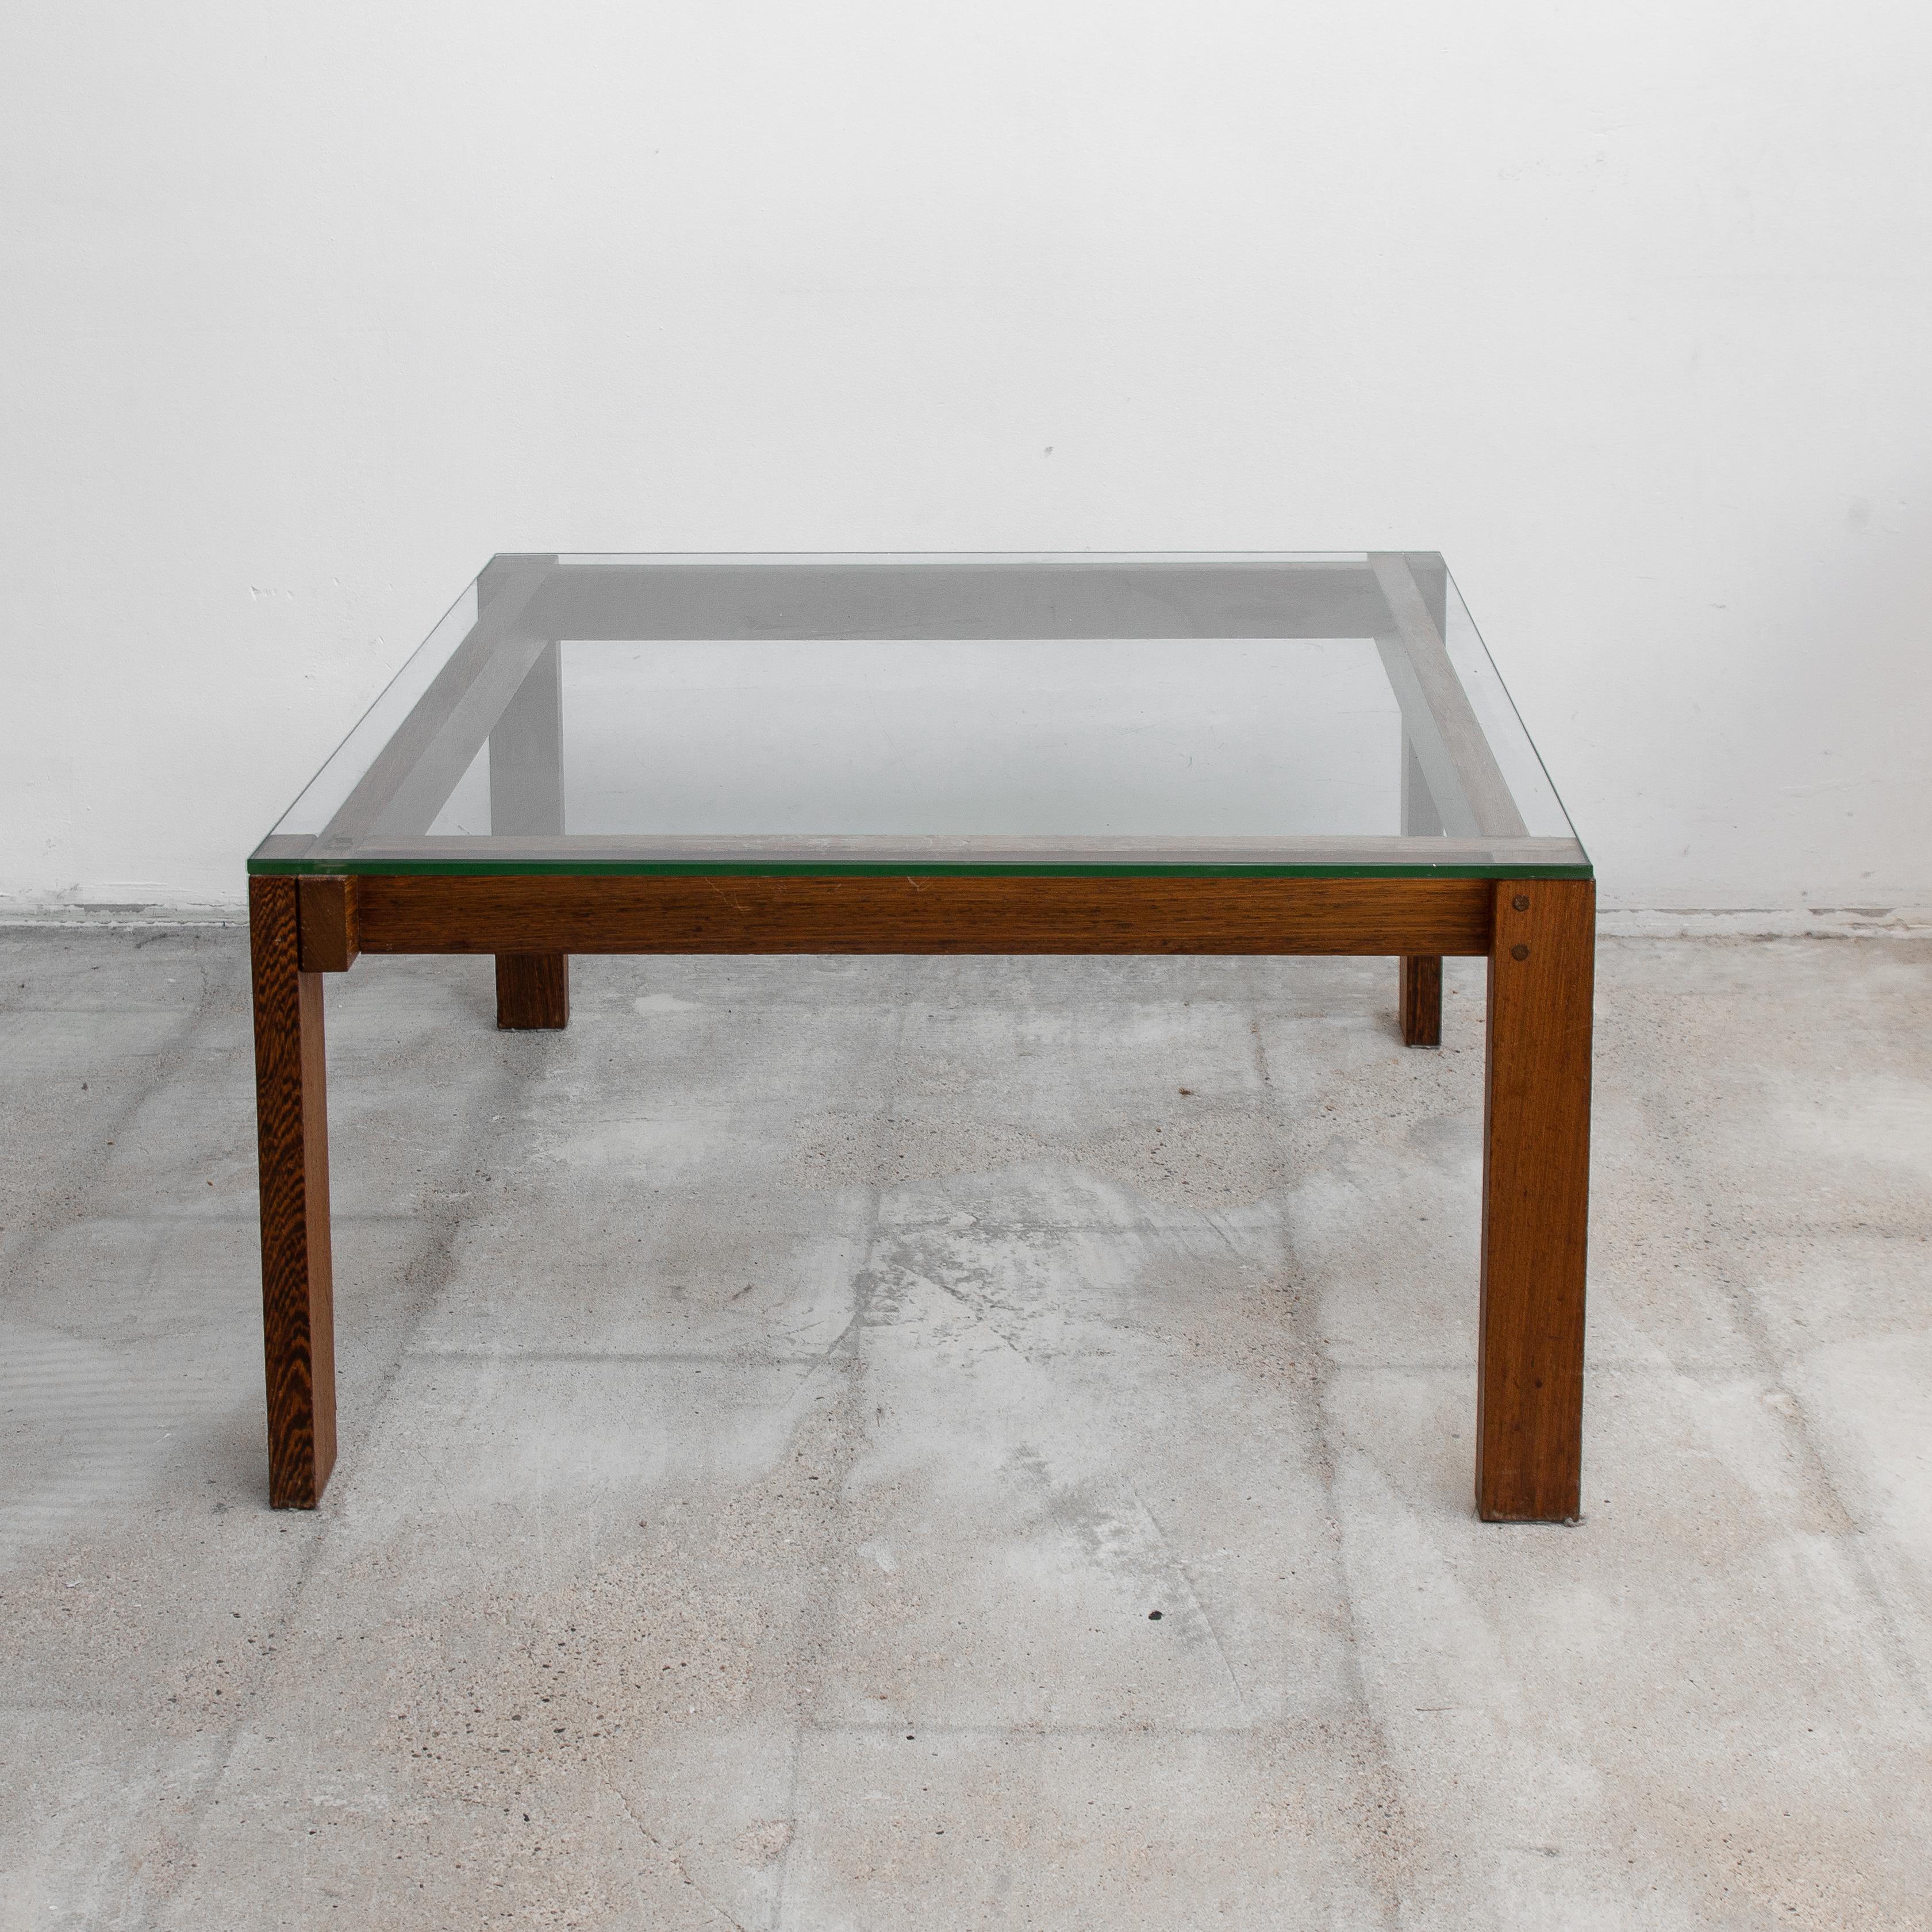 A nice midcentury coffee table, with an elegant look and finished Wengé wood. Typical Japanese style. This piece is much more stunning in person and can be viewed in our showroom in Amsterdam.